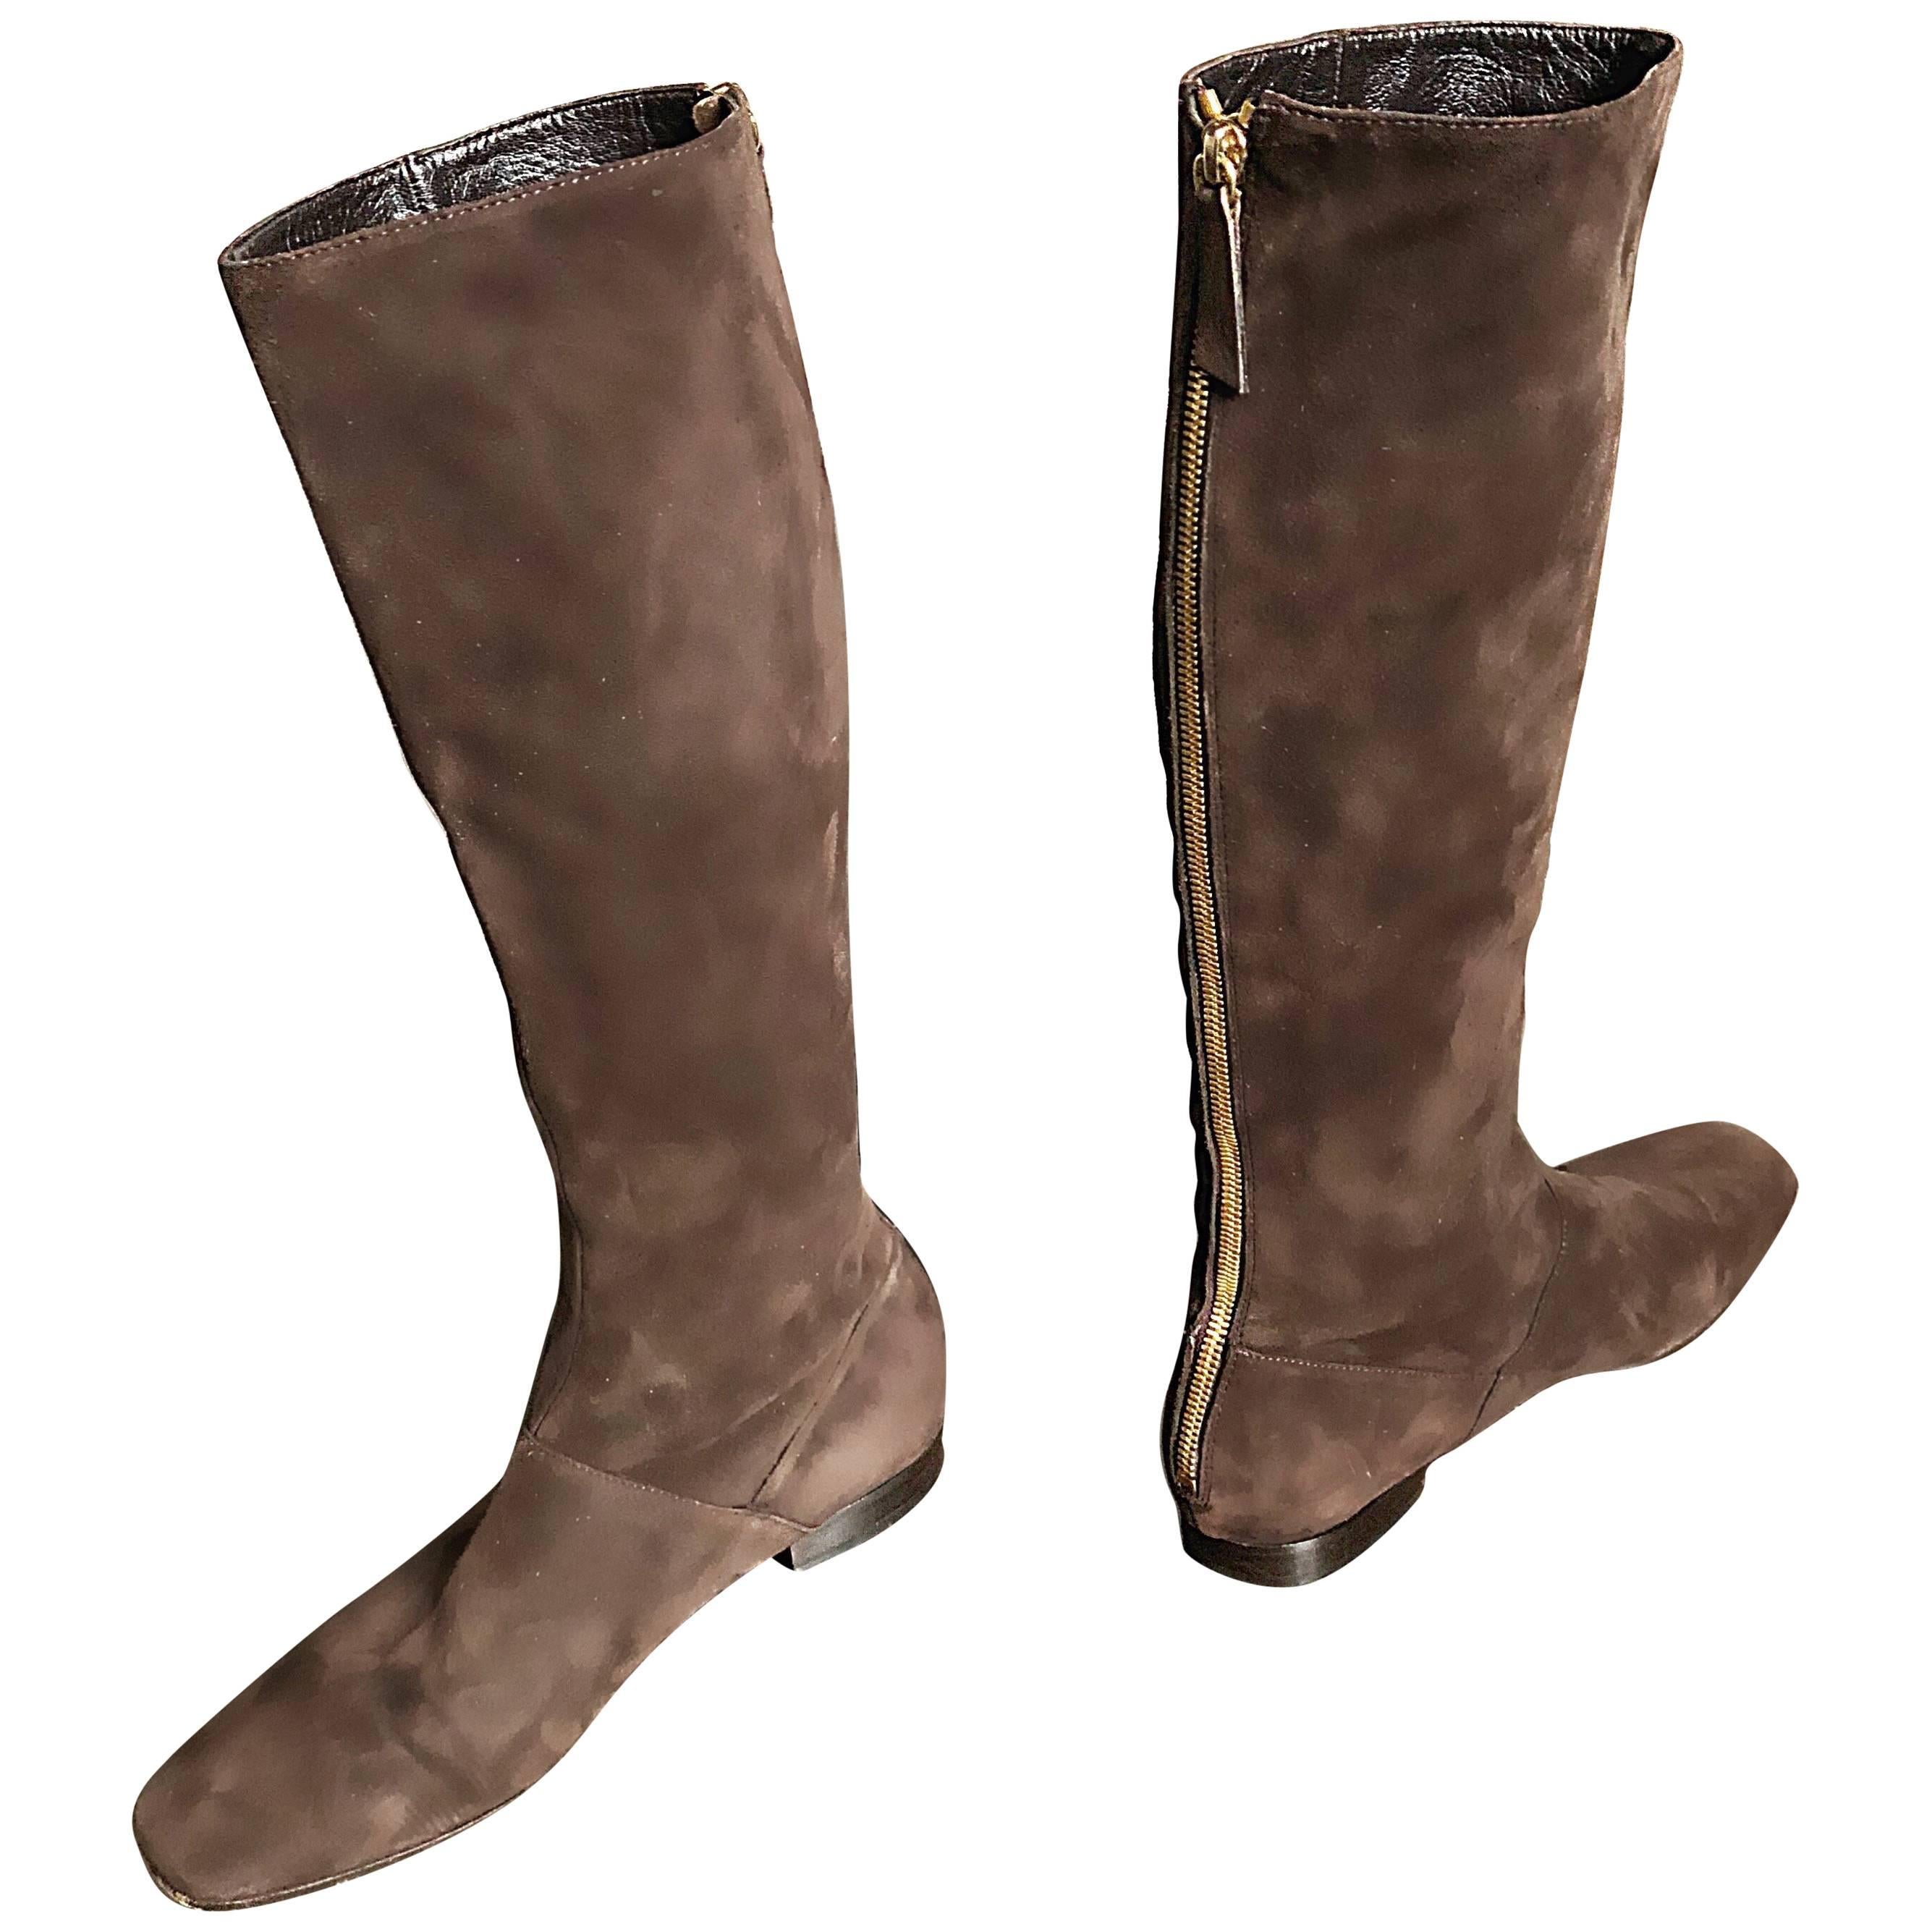 New 1990s Moschino Cheap & Chic Size 38.5 / 8.5 Brown Suede 90s Knee High Boots For Sale